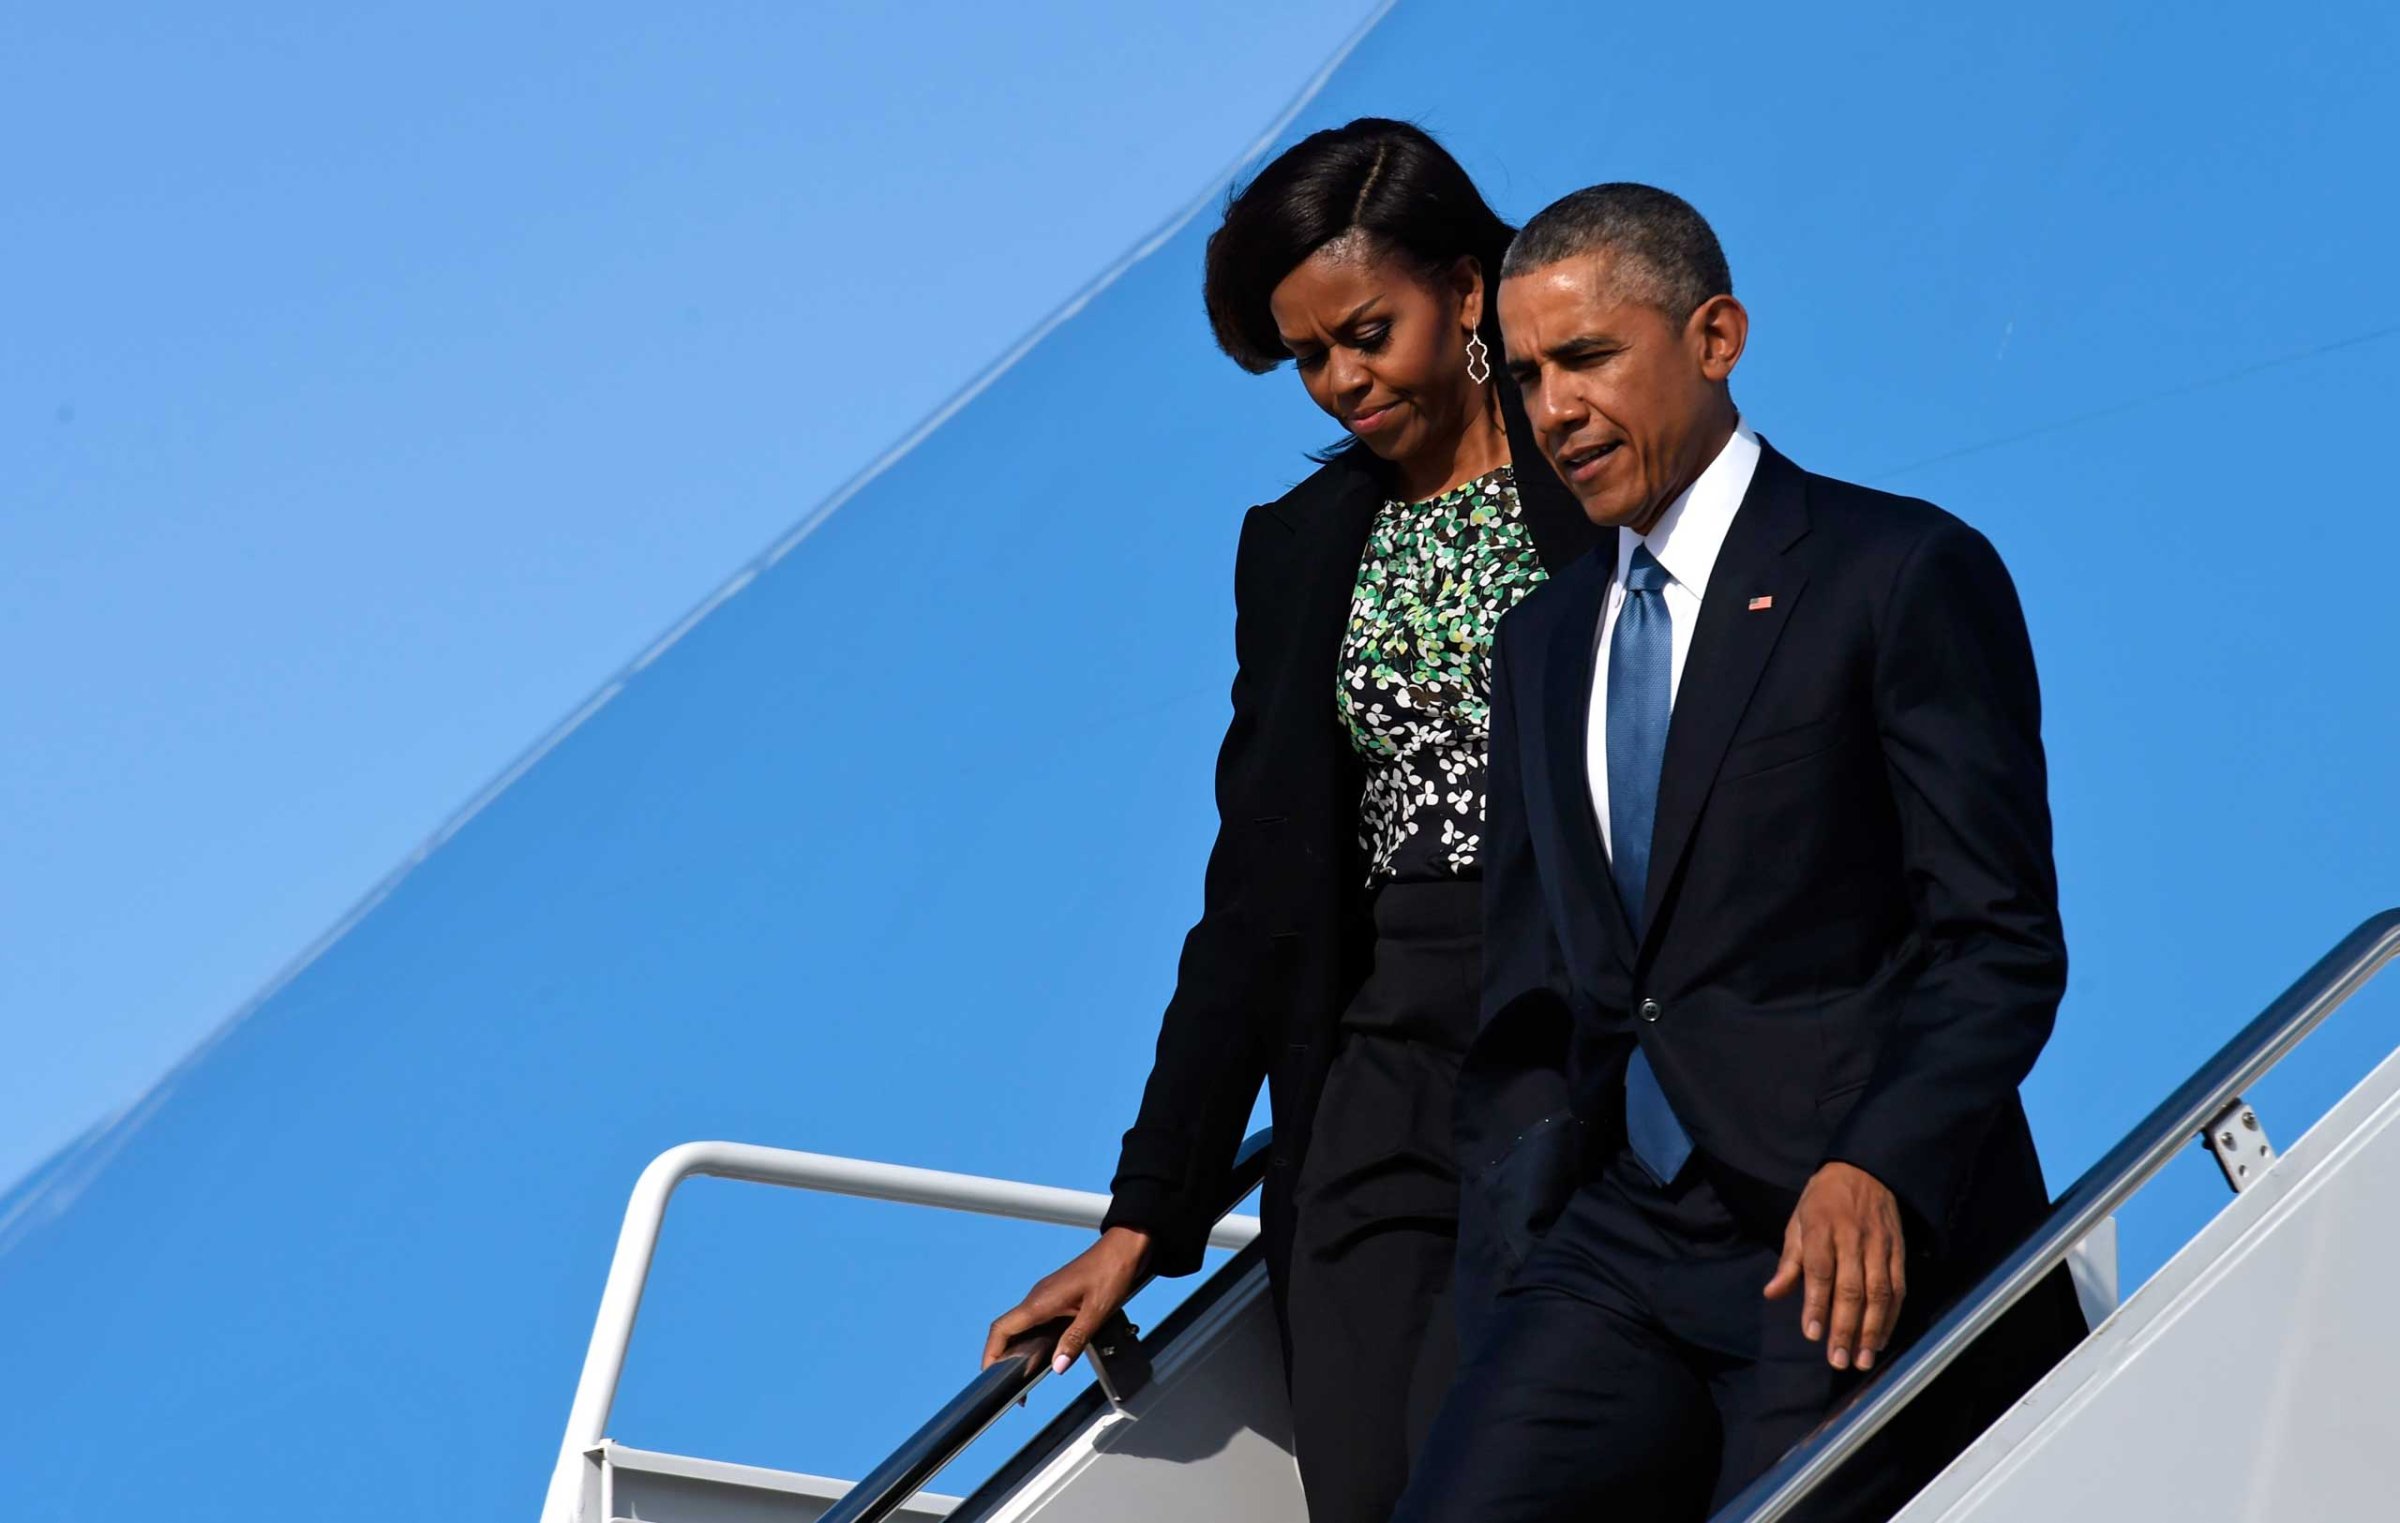 President Barack Obama and first lady Michelle Obama walk down the steps of Air Force One at Andrews Air Force Base in Md., Monday, March 30, 2015.